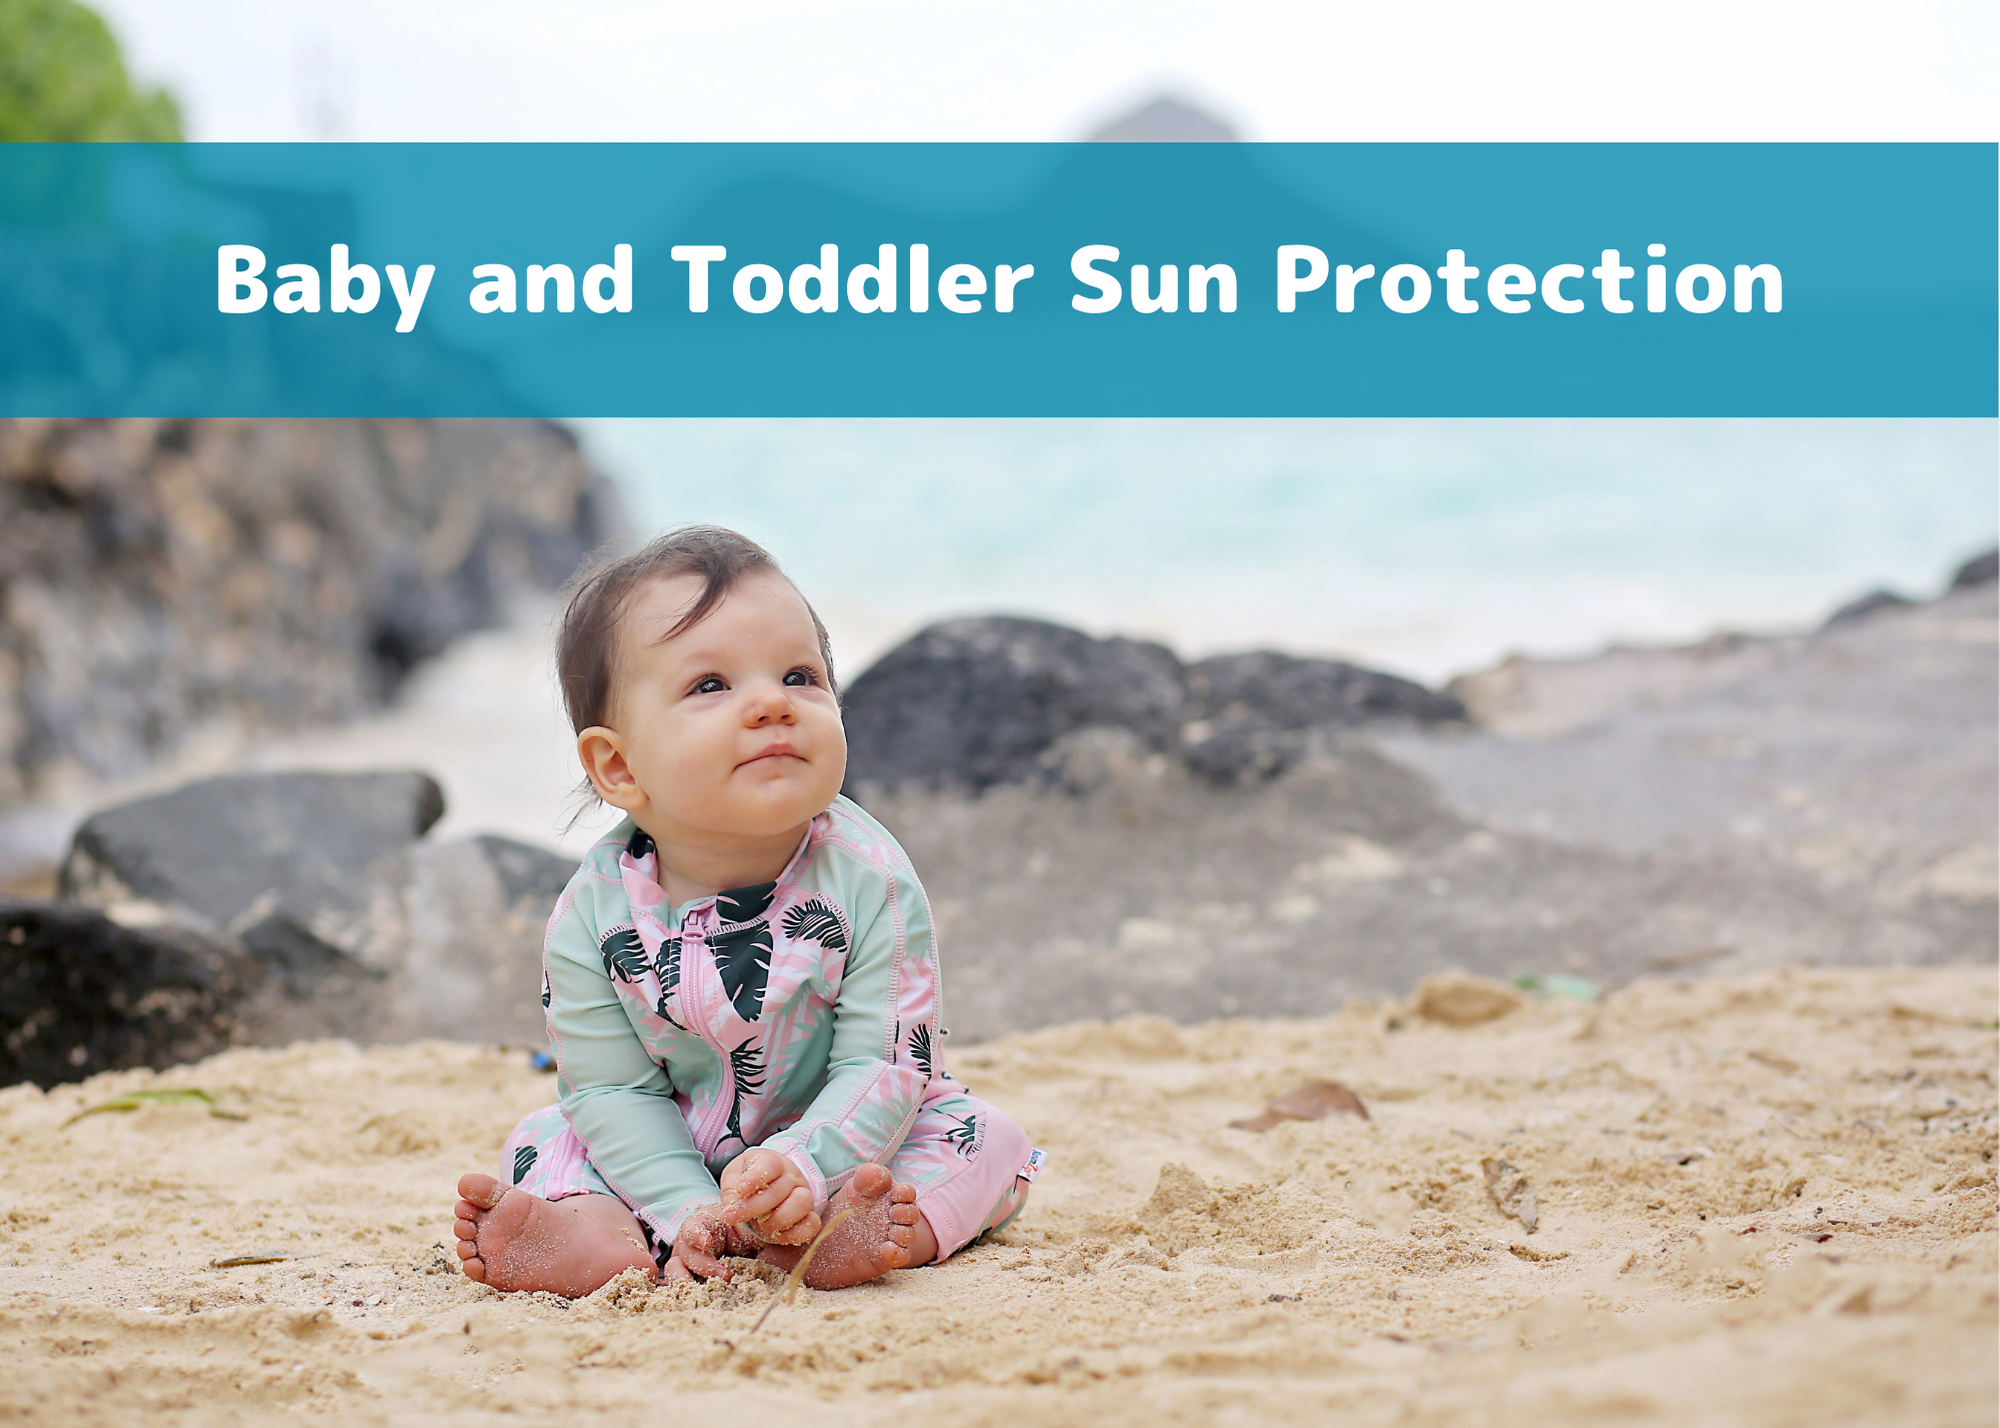 Baby and Toddler Sun Protection